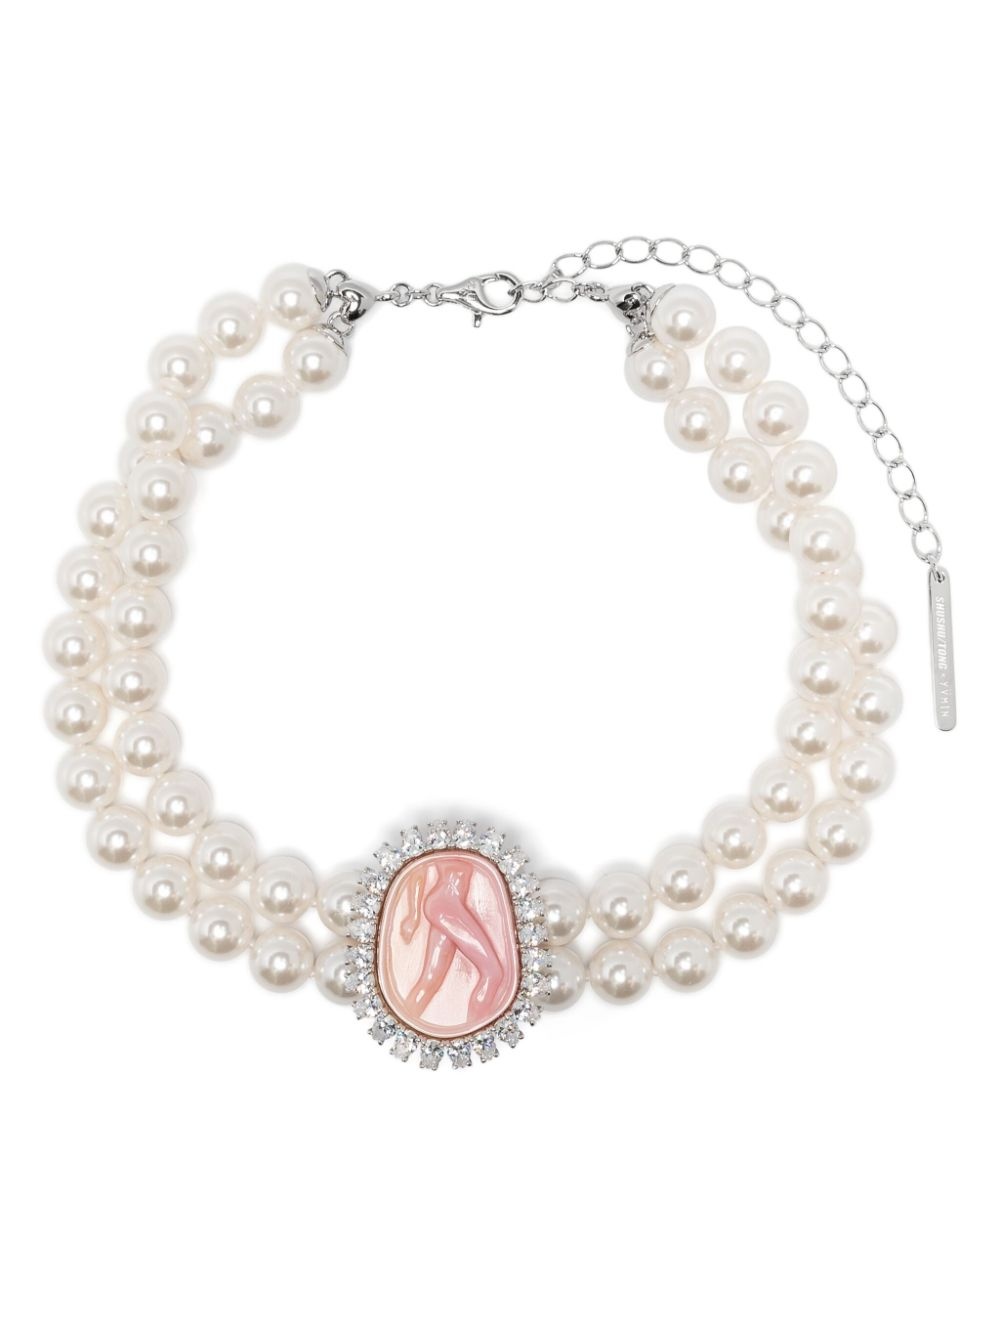 Maiden pearl necklace - 1